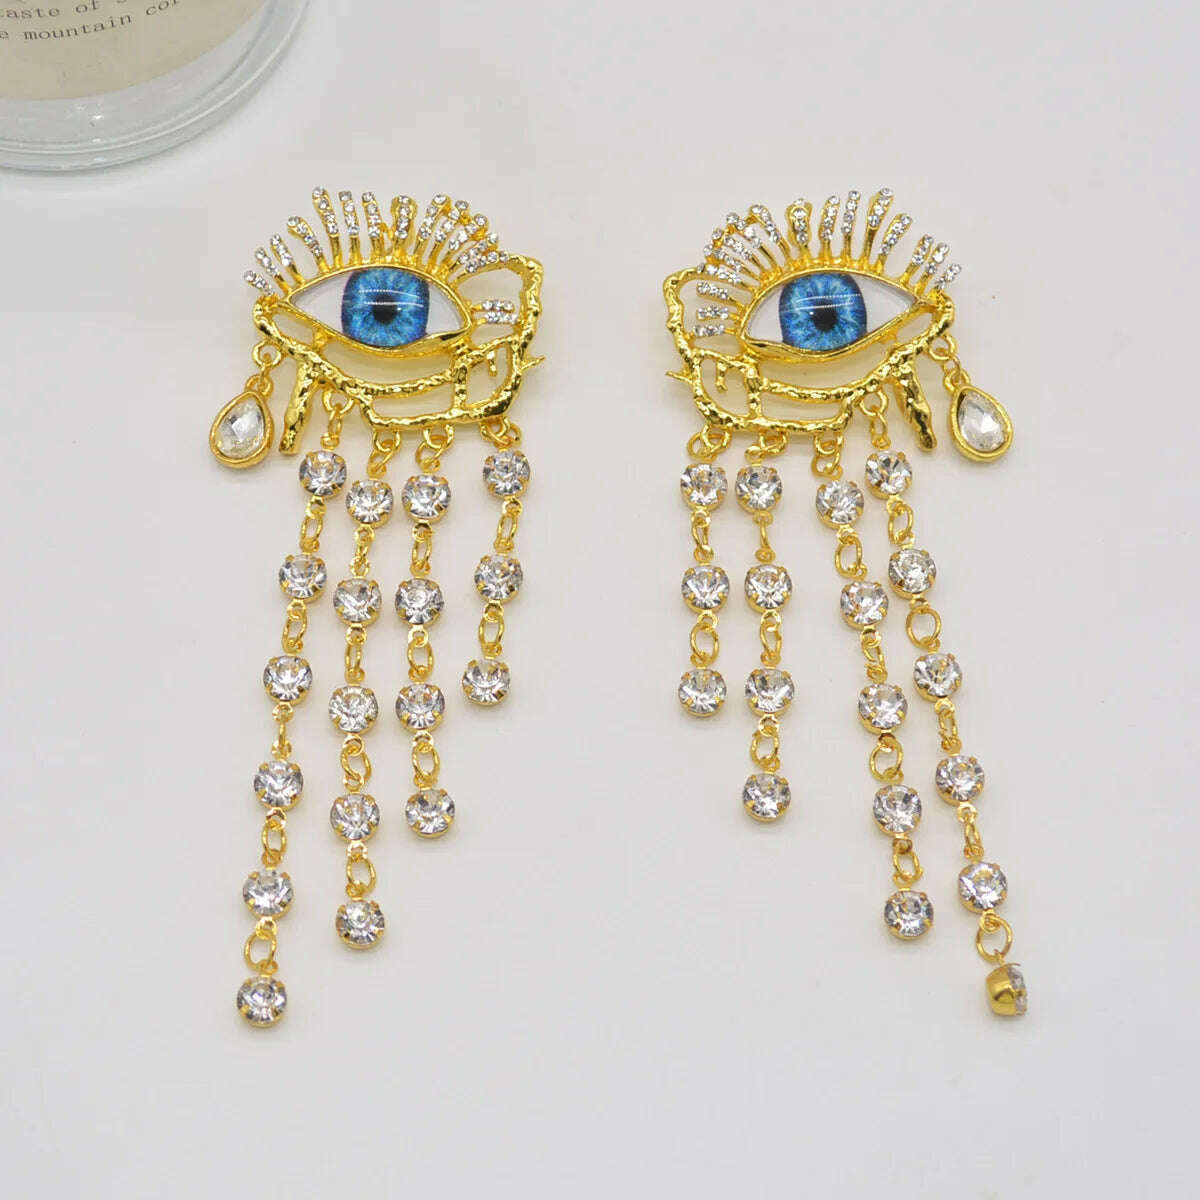 KIMLUD, Vintage Ethnic Golden Eyes Chain Dangle Earrings For Women Fashion Jewelry Baroque Style Lady Statement Earrings  Accessories, golden yellow, KIMLUD Women's Clothes